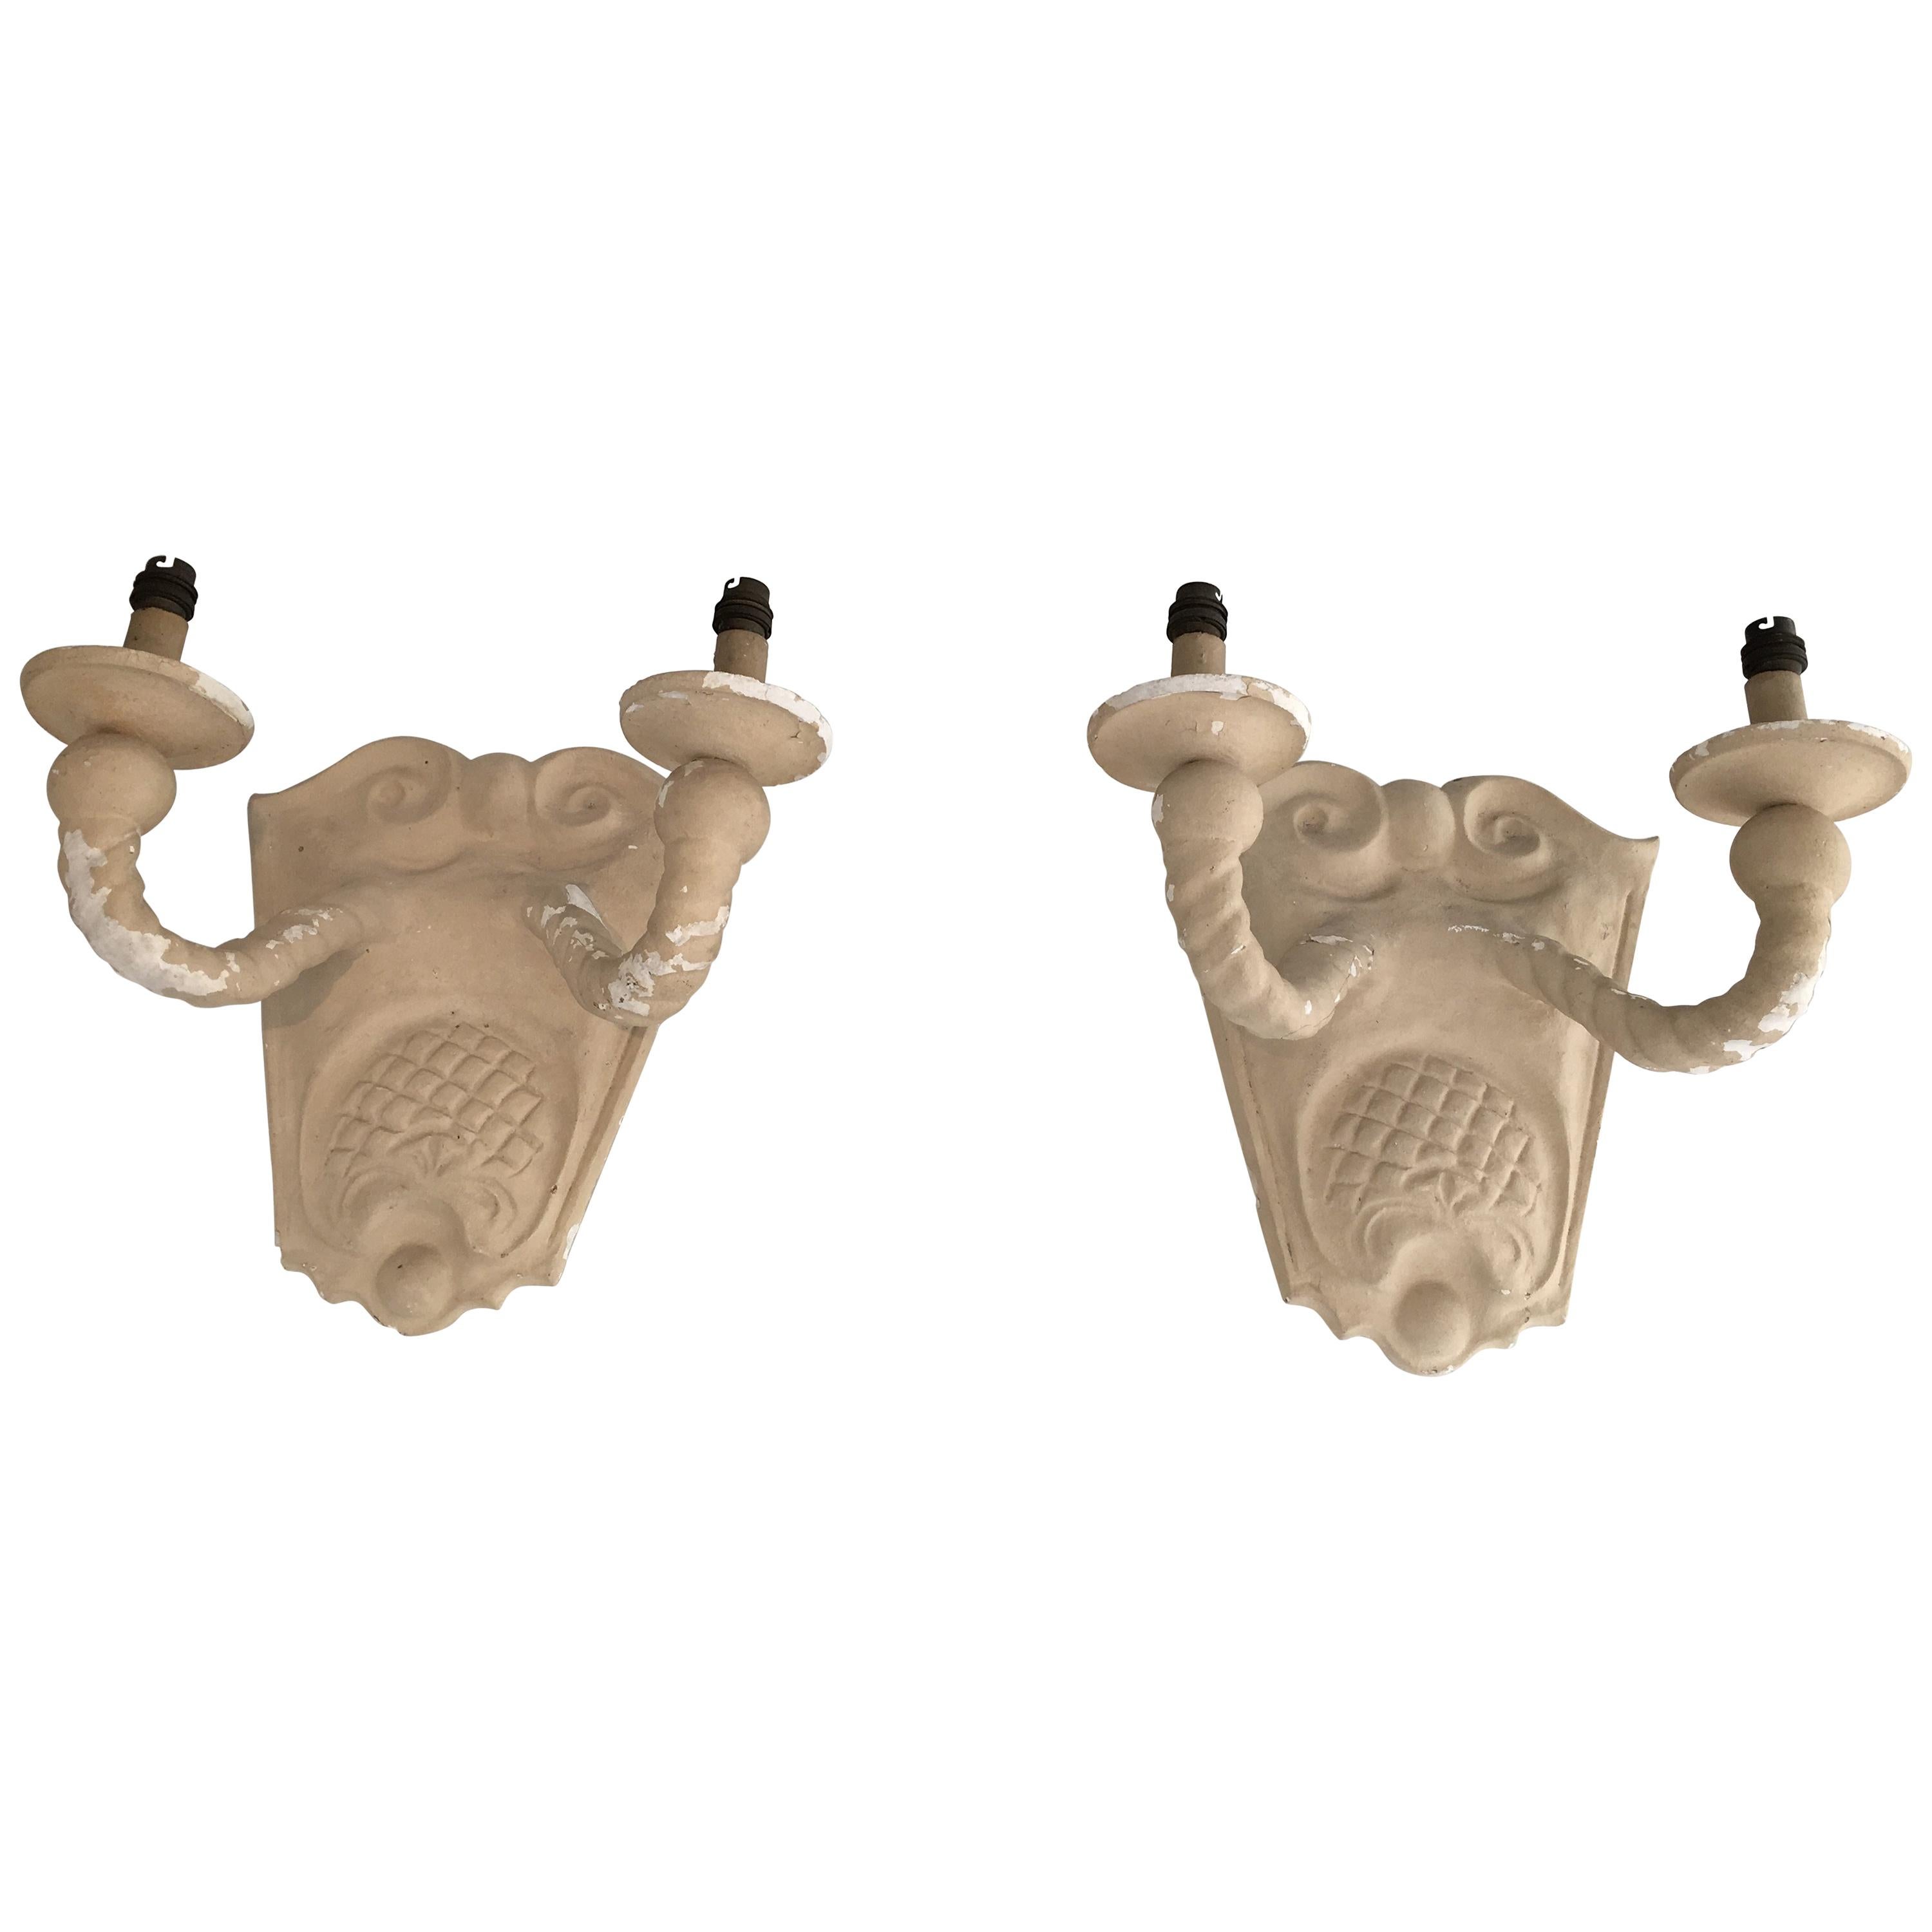 Pair of Plaster Wall Sconces, French, circa 1940